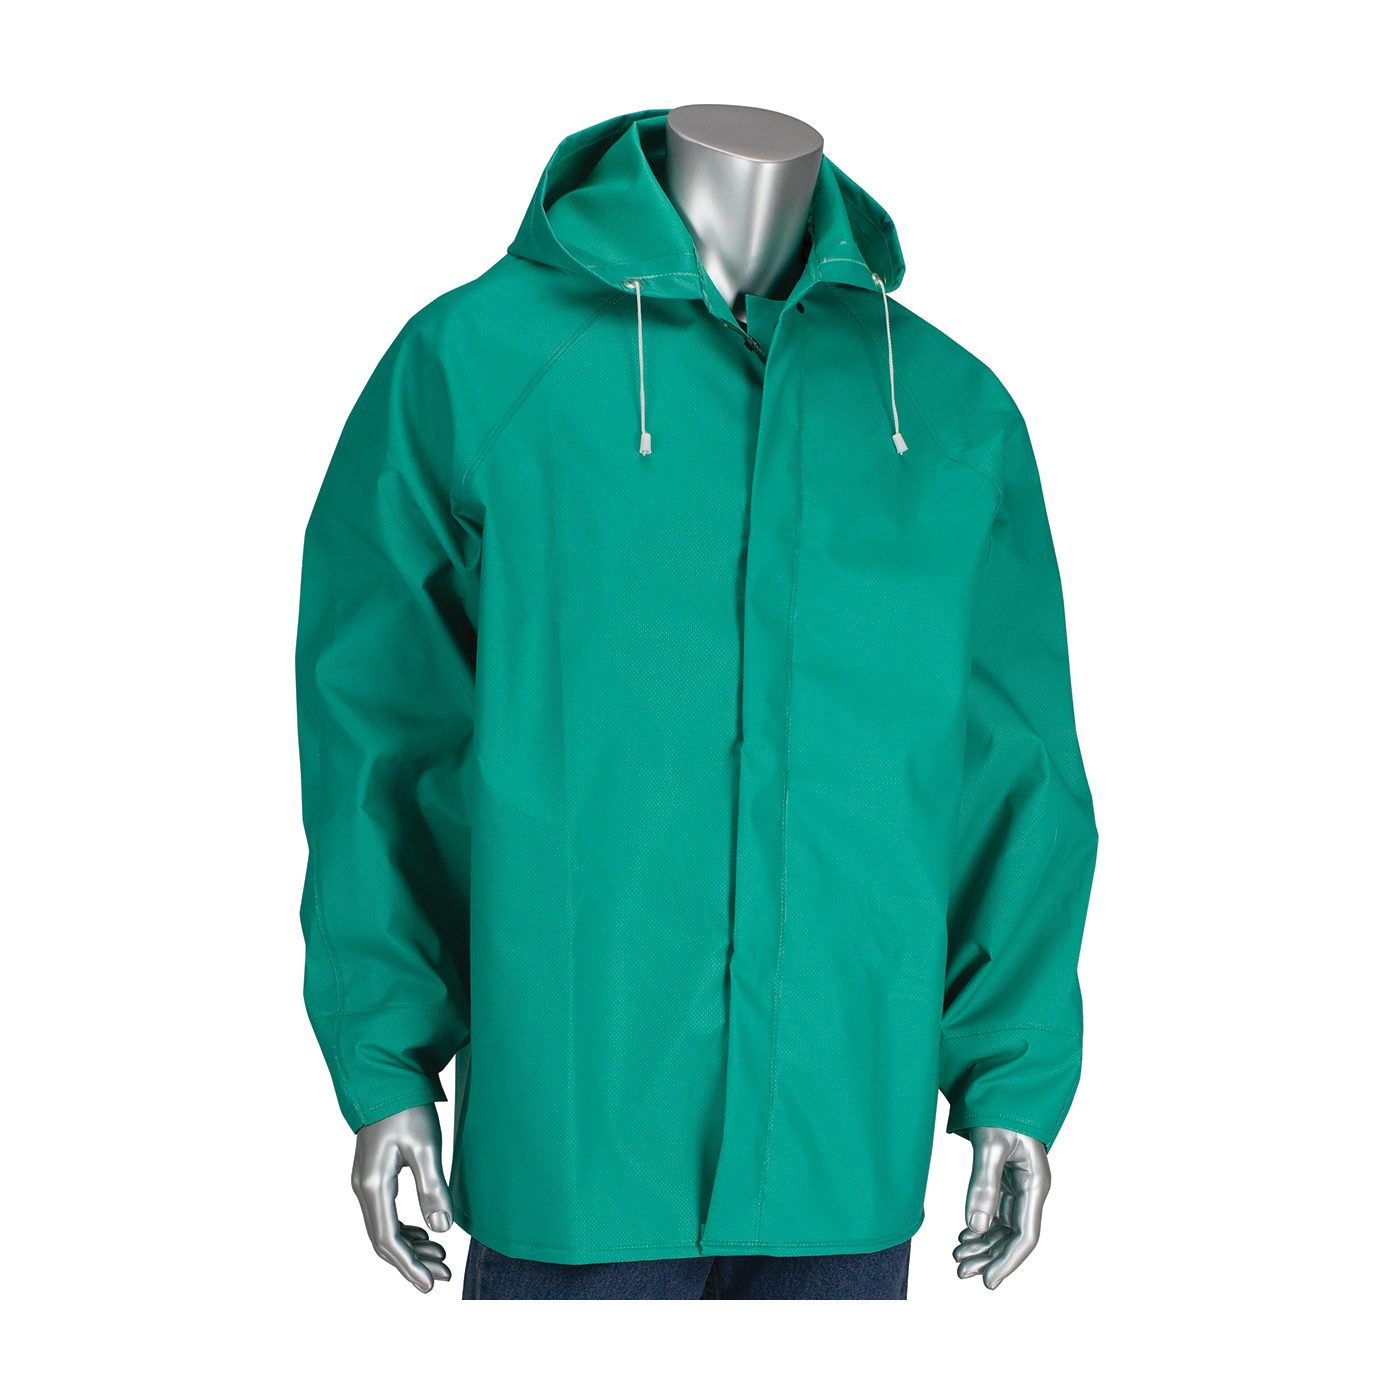 PIP® FALCON™ ChemFR™ 205-420JH/2X Rain Jacket With Hood, 2XL, Green, Nylon/PVC, Resists: Flame and Water, ASTM D6413